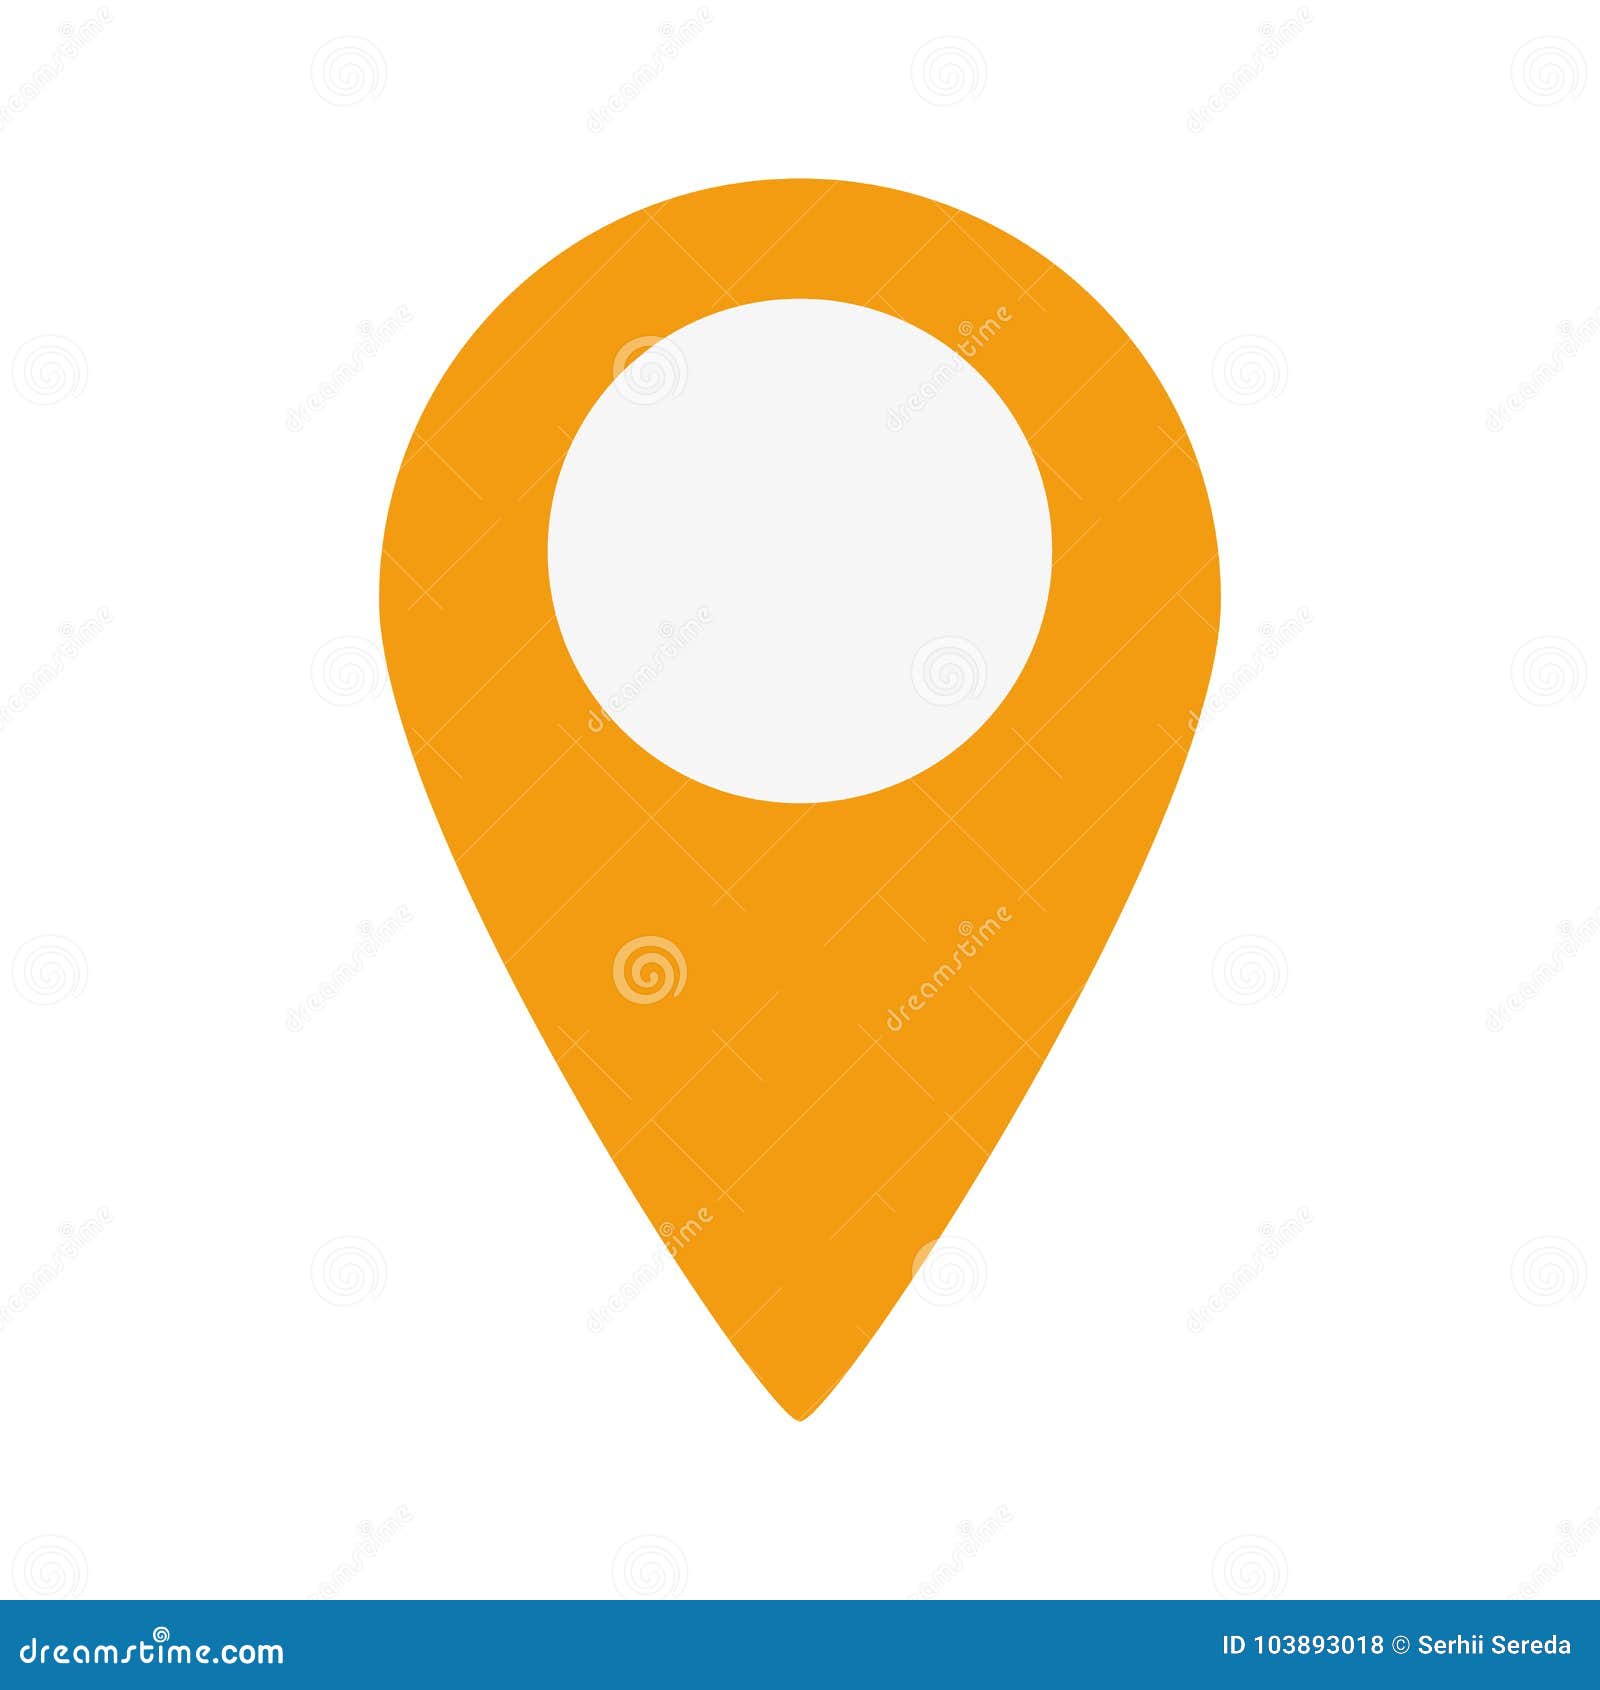 ghost Crazy system Map Marker Icon stock illustration. Illustration of button - 103893018